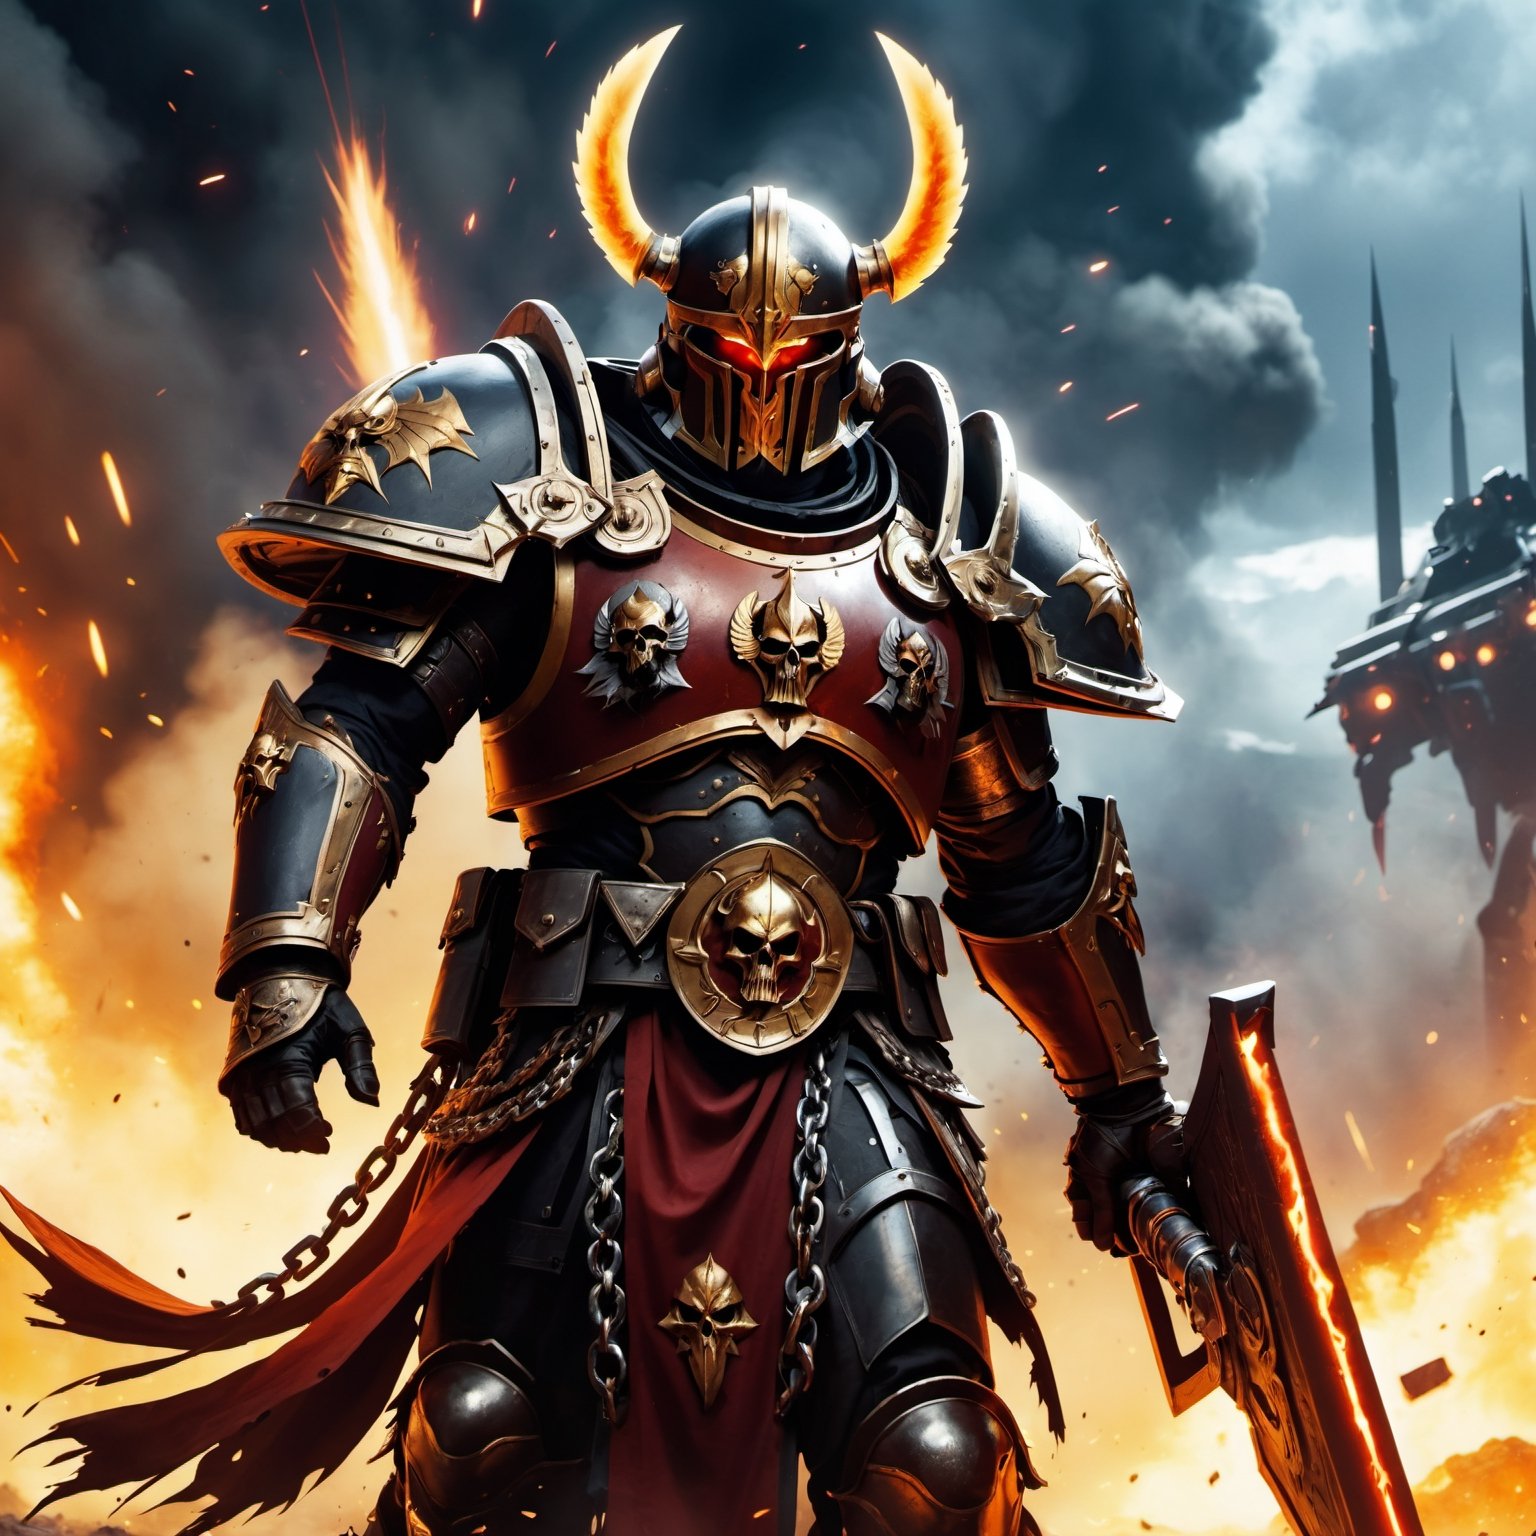 (8k HDR), (masterpiece, best quality),

Title: Ares, God of War in the Warhammer 40K Universe

"Ares as a Space Marine Captain in Warhammer 40K, charging into battle against alien enemies on a war-torn planet. He wears ornate, blood-red power armor adorned with war symbols and skulls, wielding a glowing thunder hammer wrapped in chains and a bolt pistol. The battlefield is chaotic with explosions, smoke, and falling drop pods, under a dark, fiery sky."

dark and vibrant, (micheal bay cinematic shots), depth of field, 2D